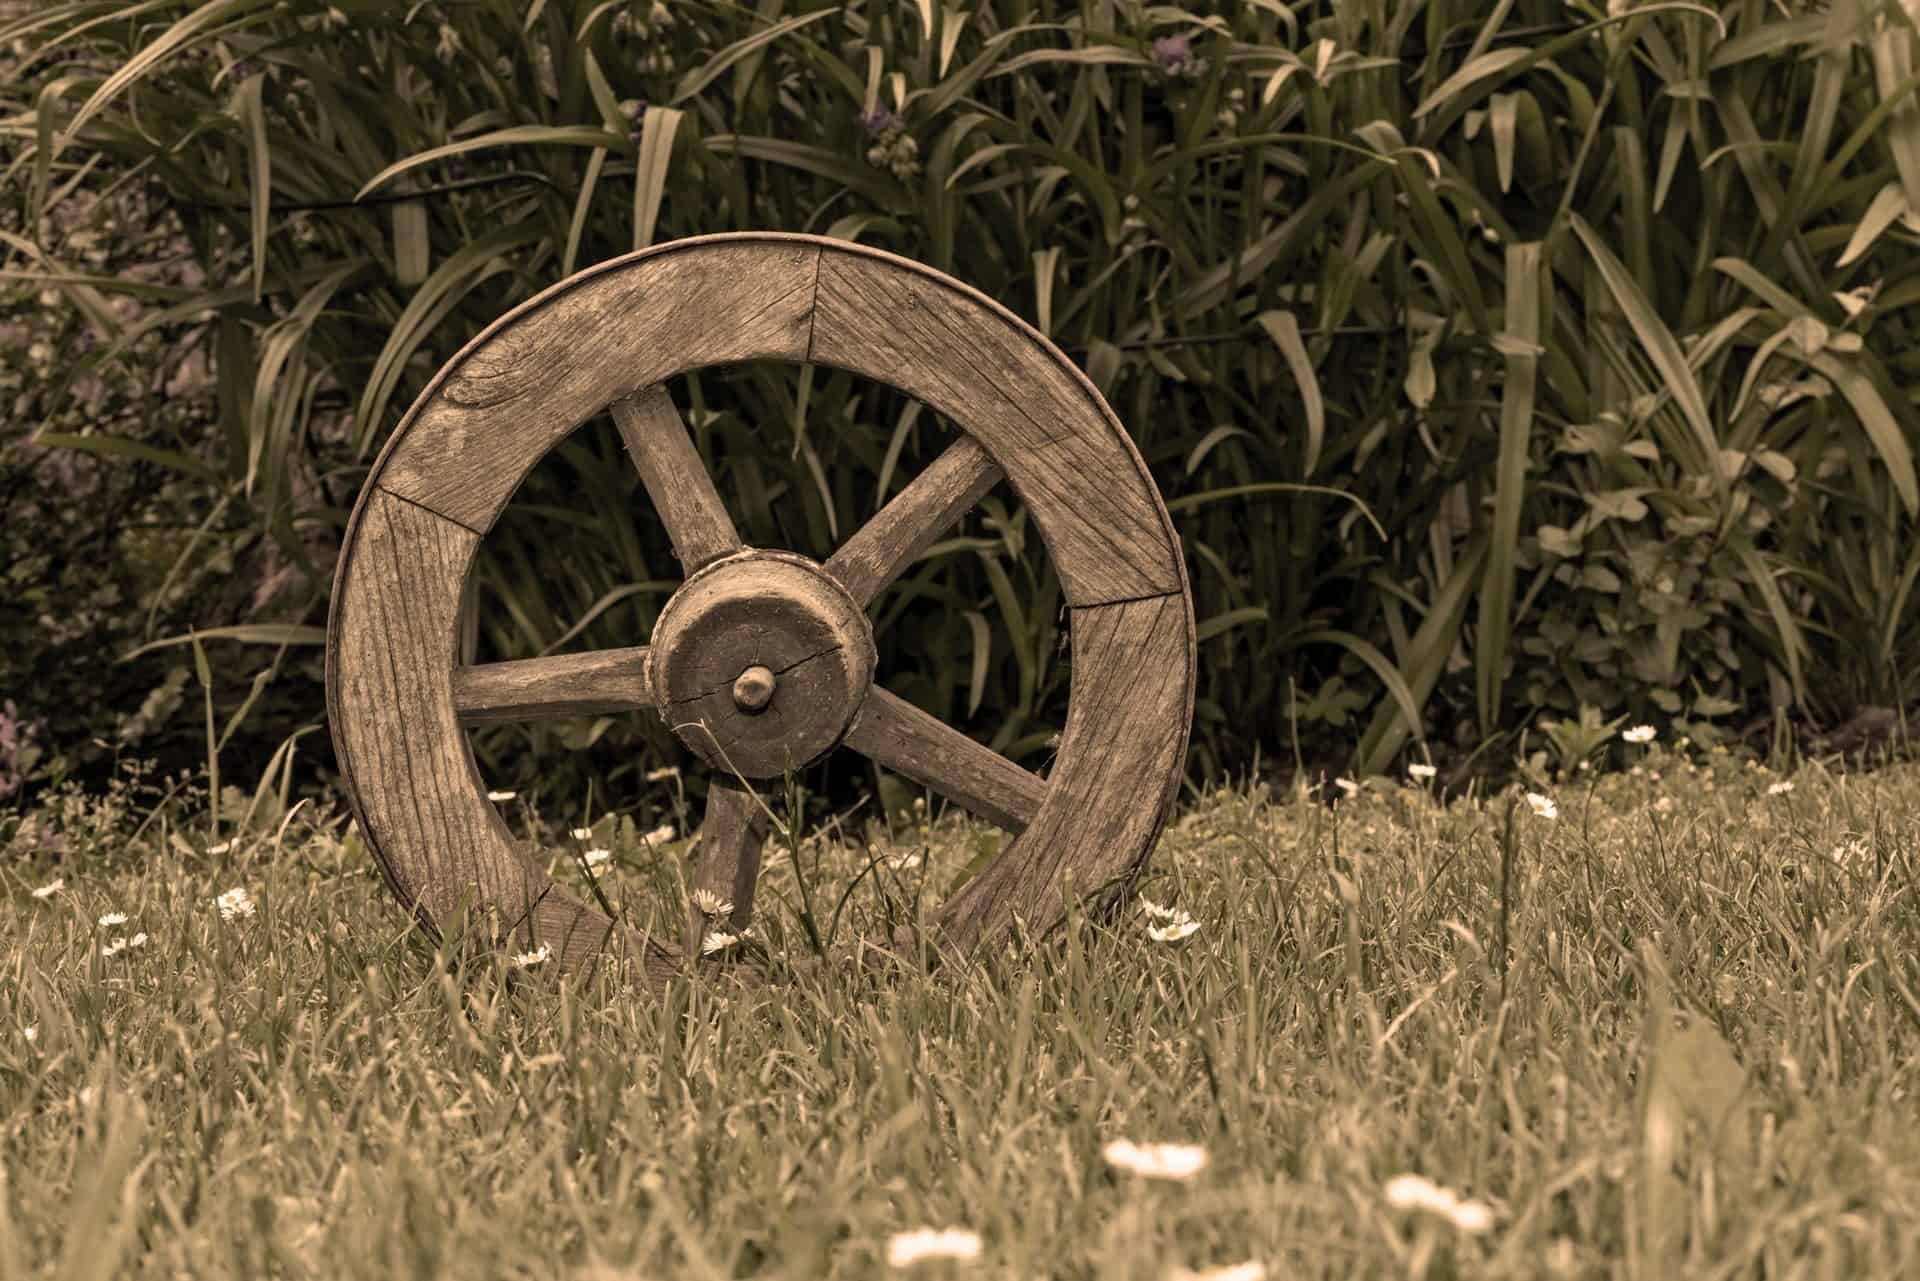 wooden wagon wheel in grass with dandelions in front of vegetation